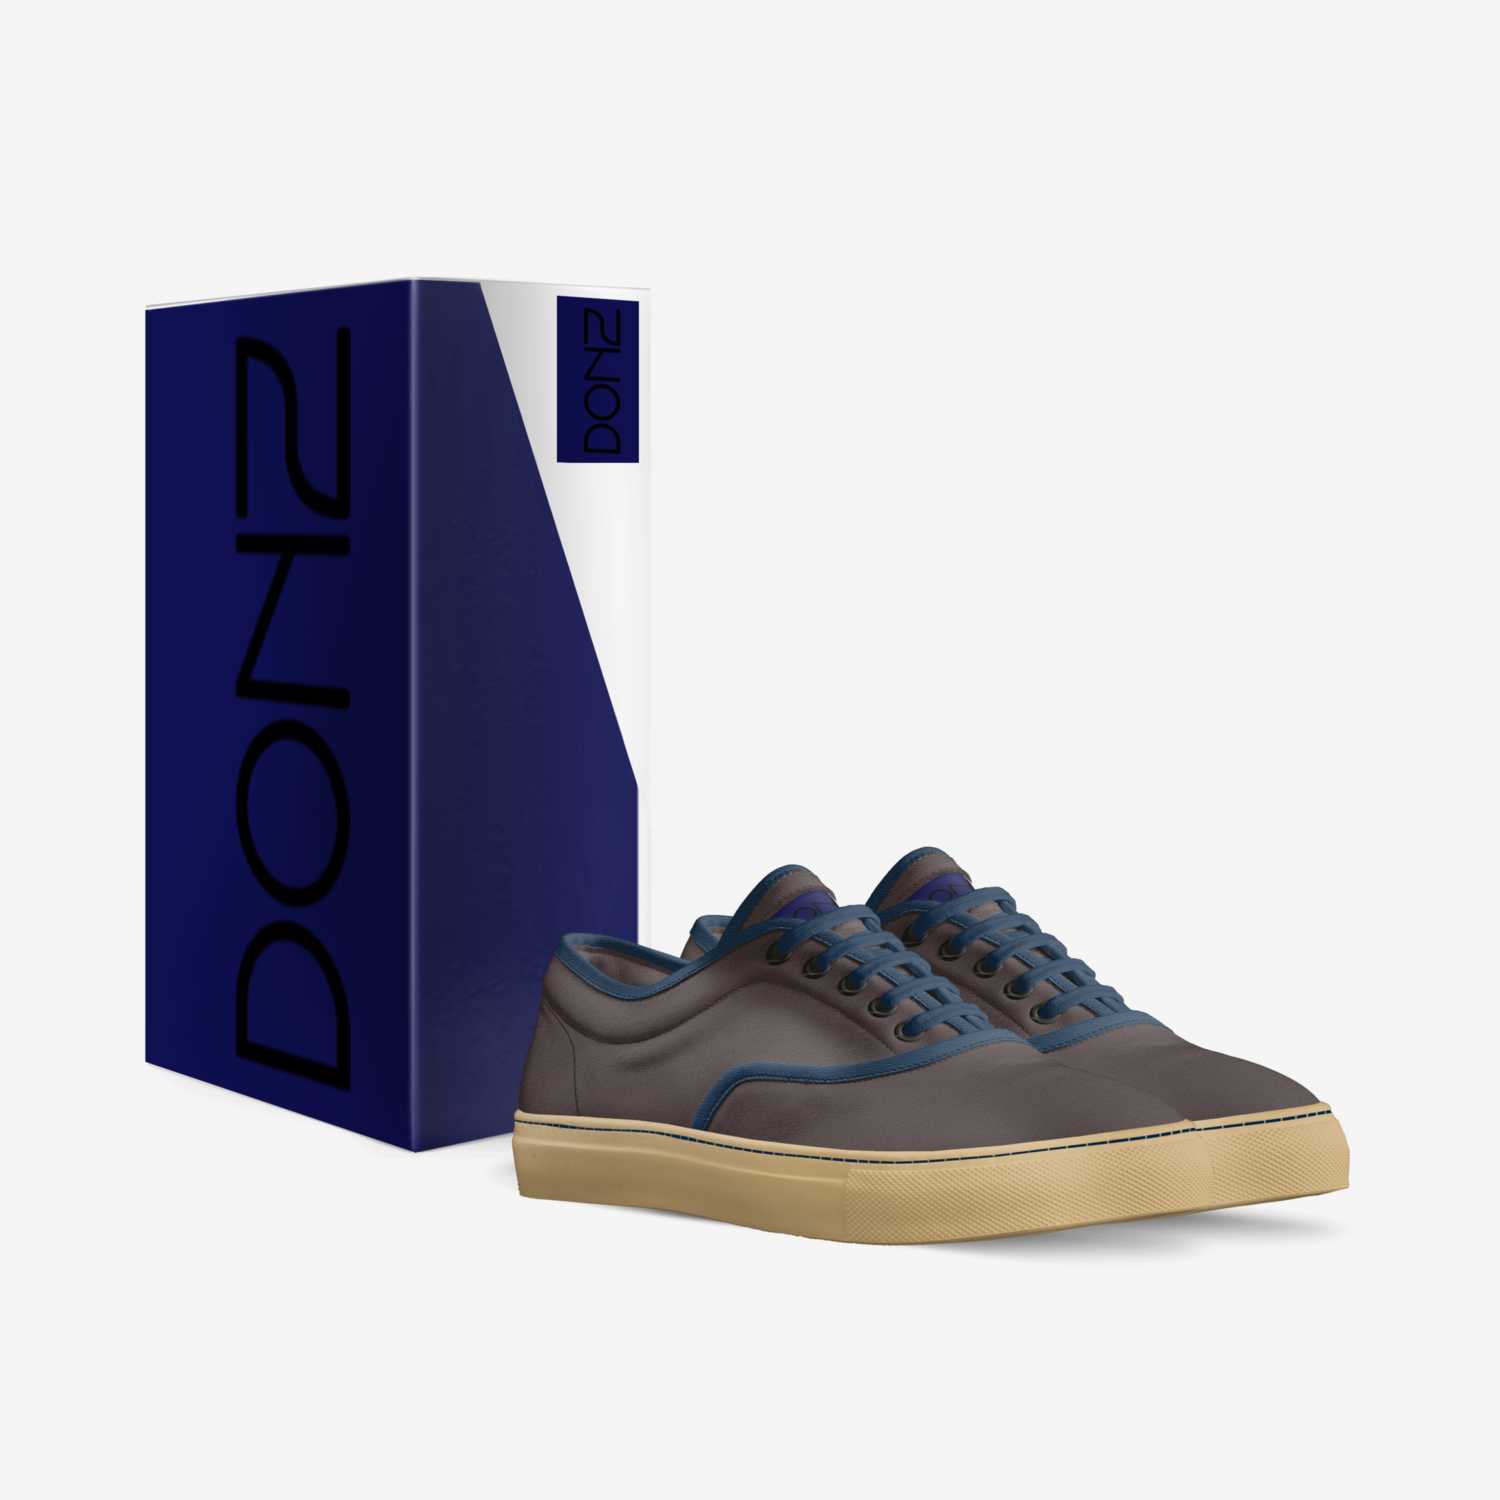 DONZ custom made in Italy shoes by Landon Law-palm | Box view